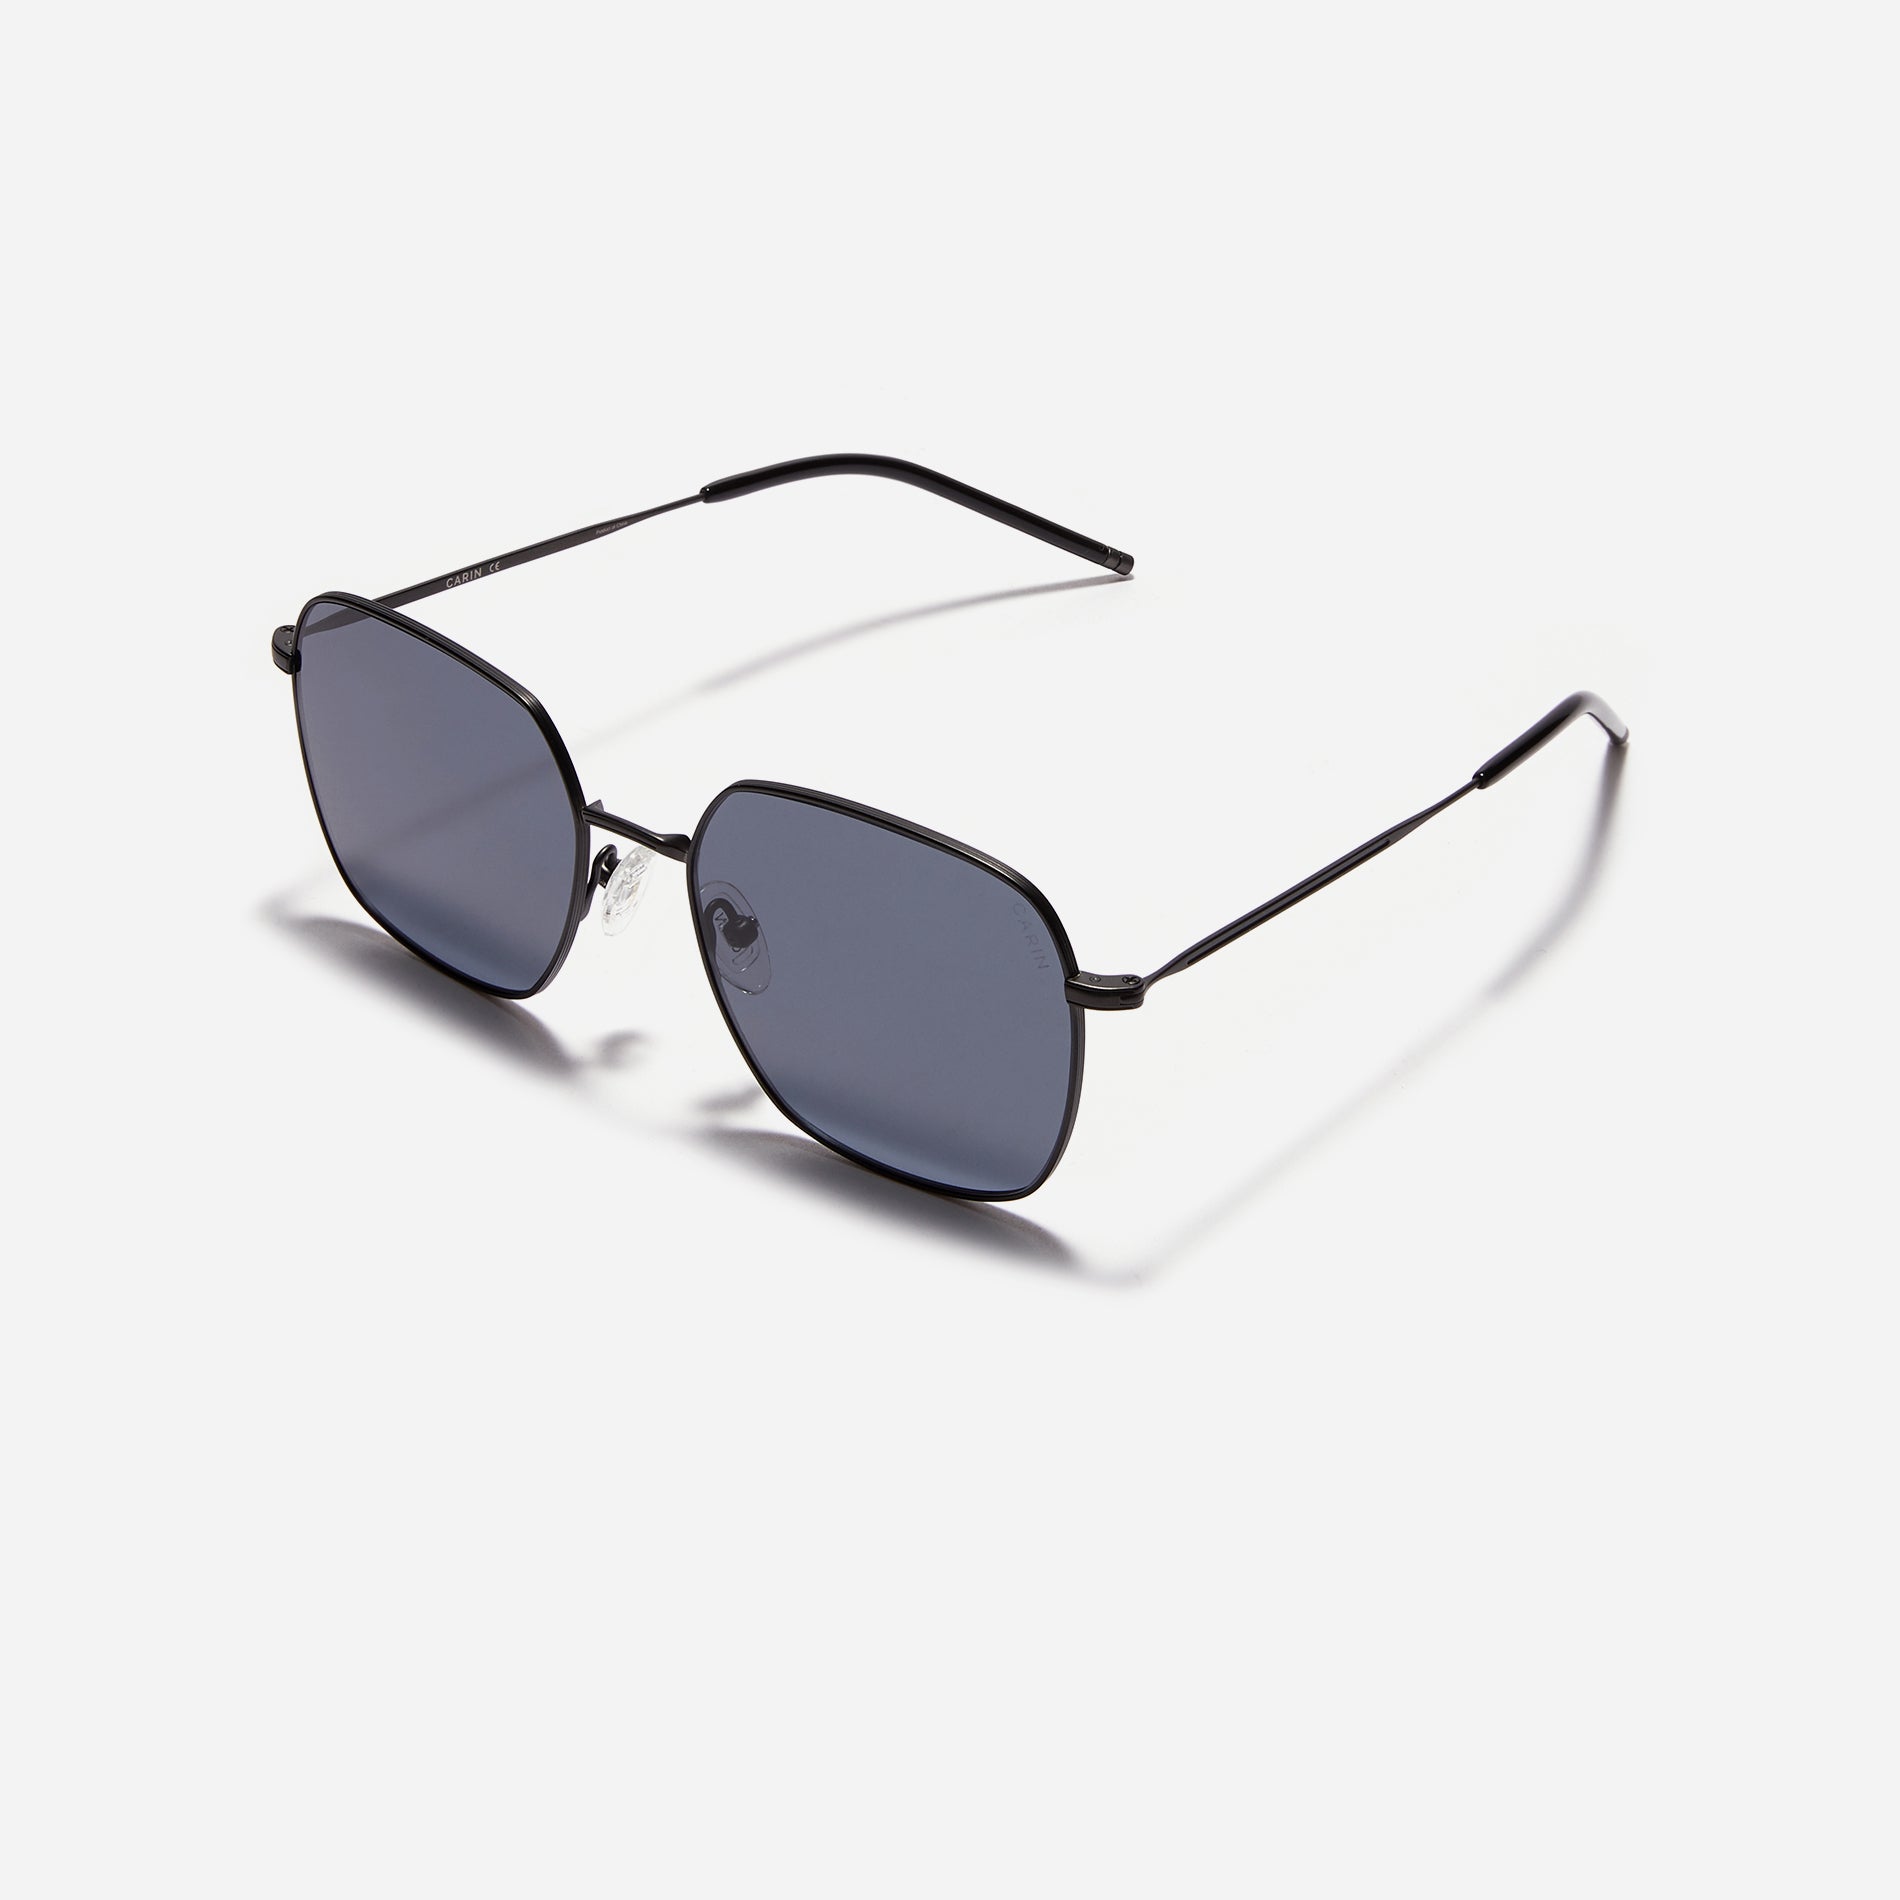 Retro aesthetic square-shaped sunglasses crafted entirely from titanium.